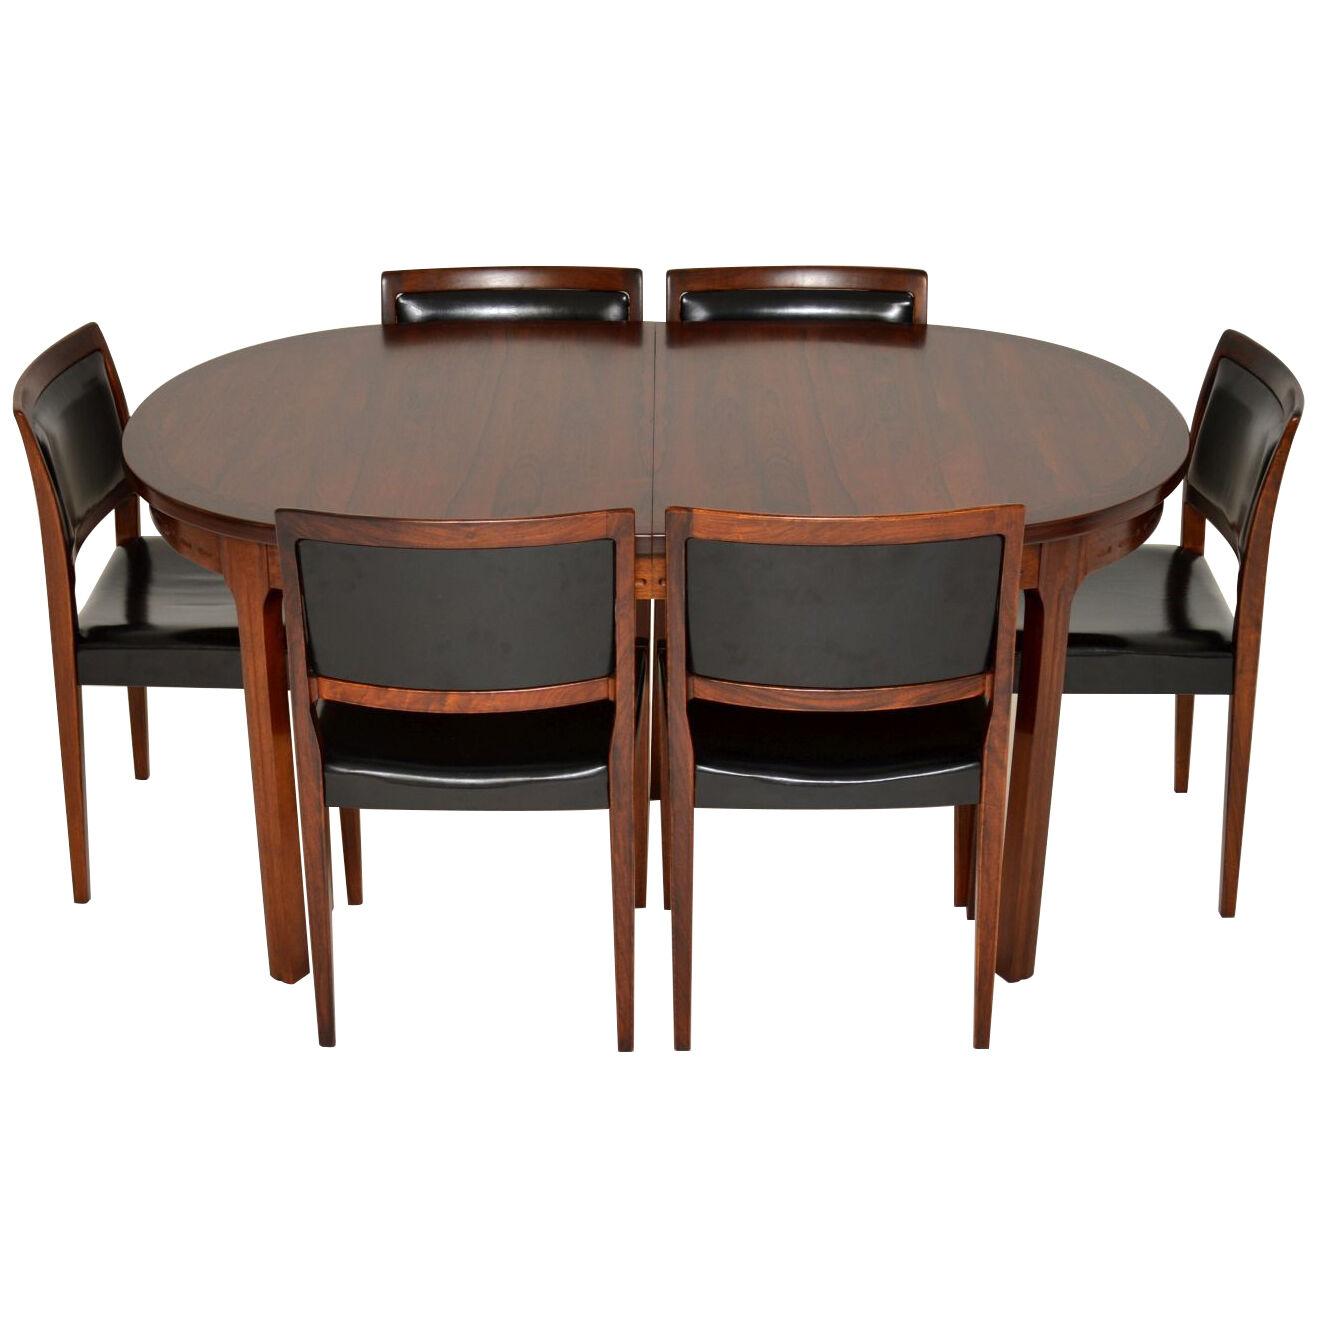 1960's Swedish Rosewood Dining Table & Chairs by Nils Jonsson